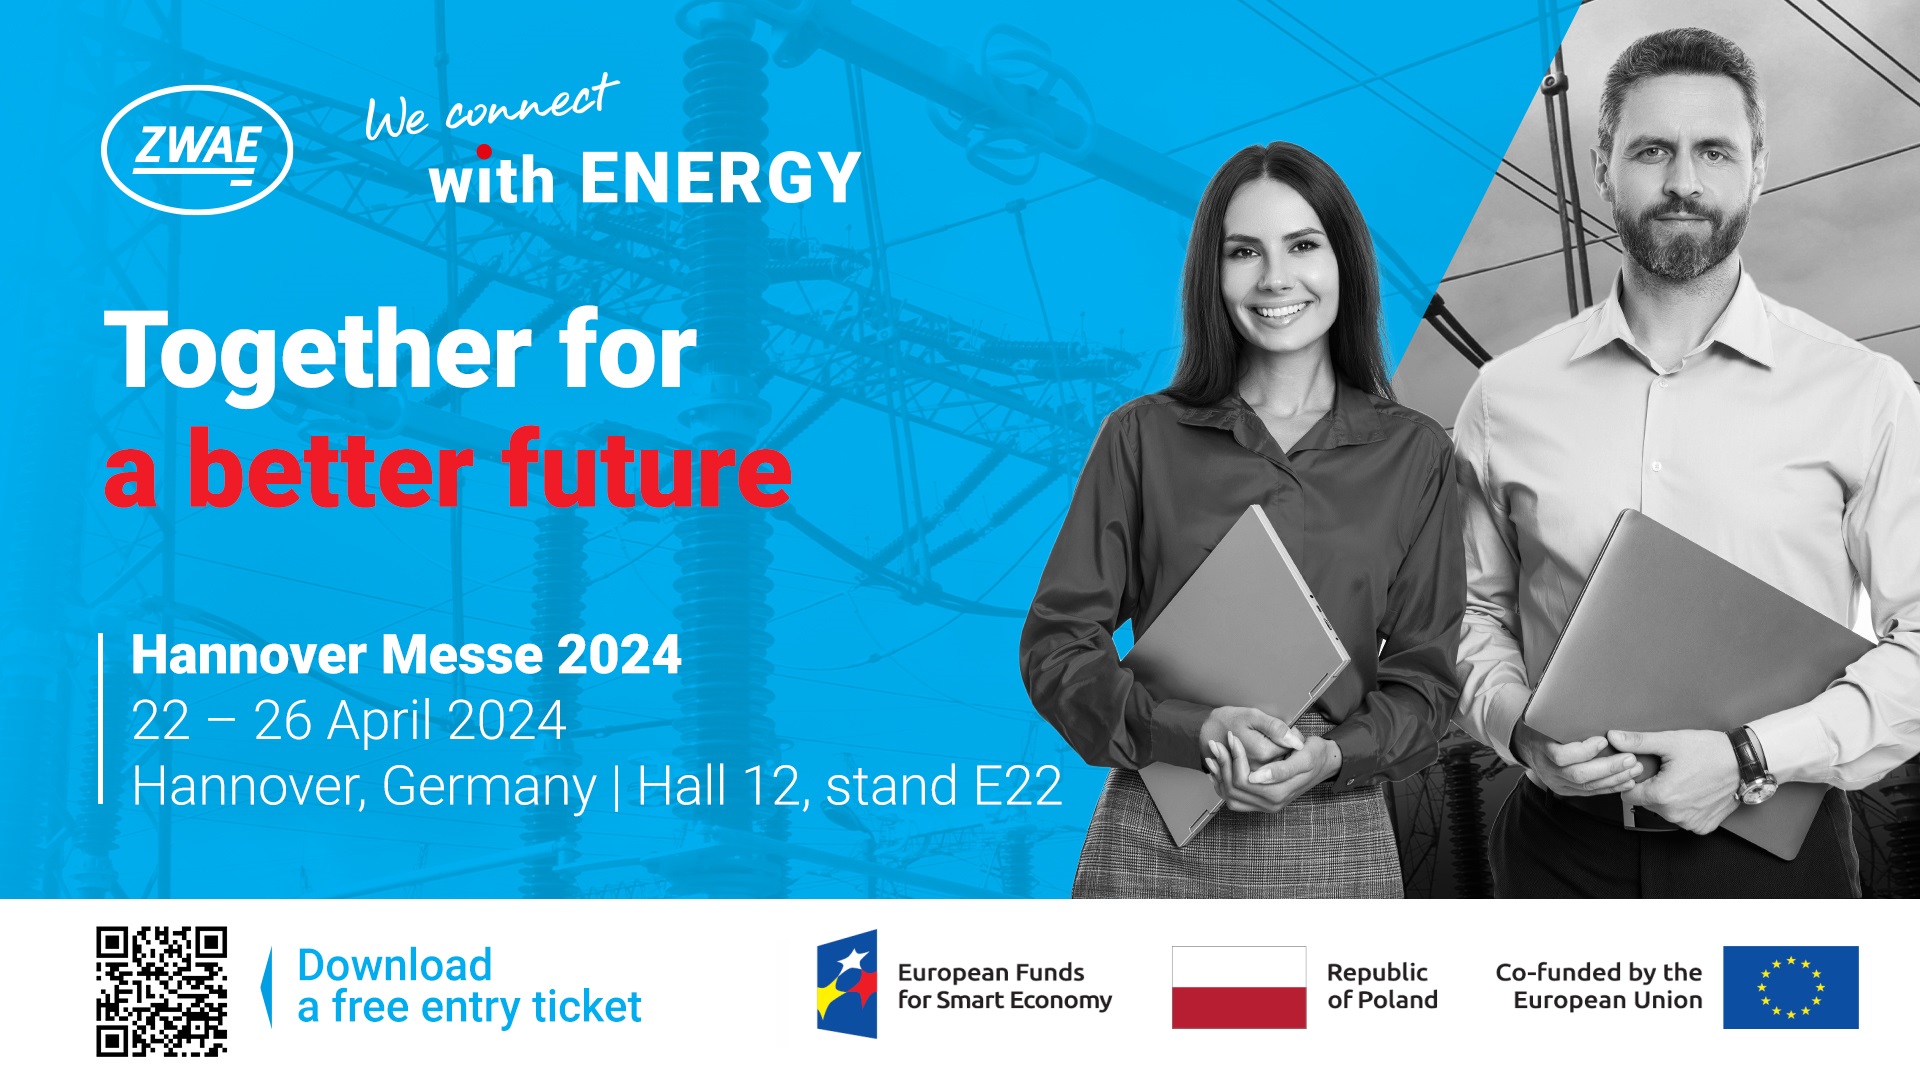 ZInvitation to Hannover Messe 2024